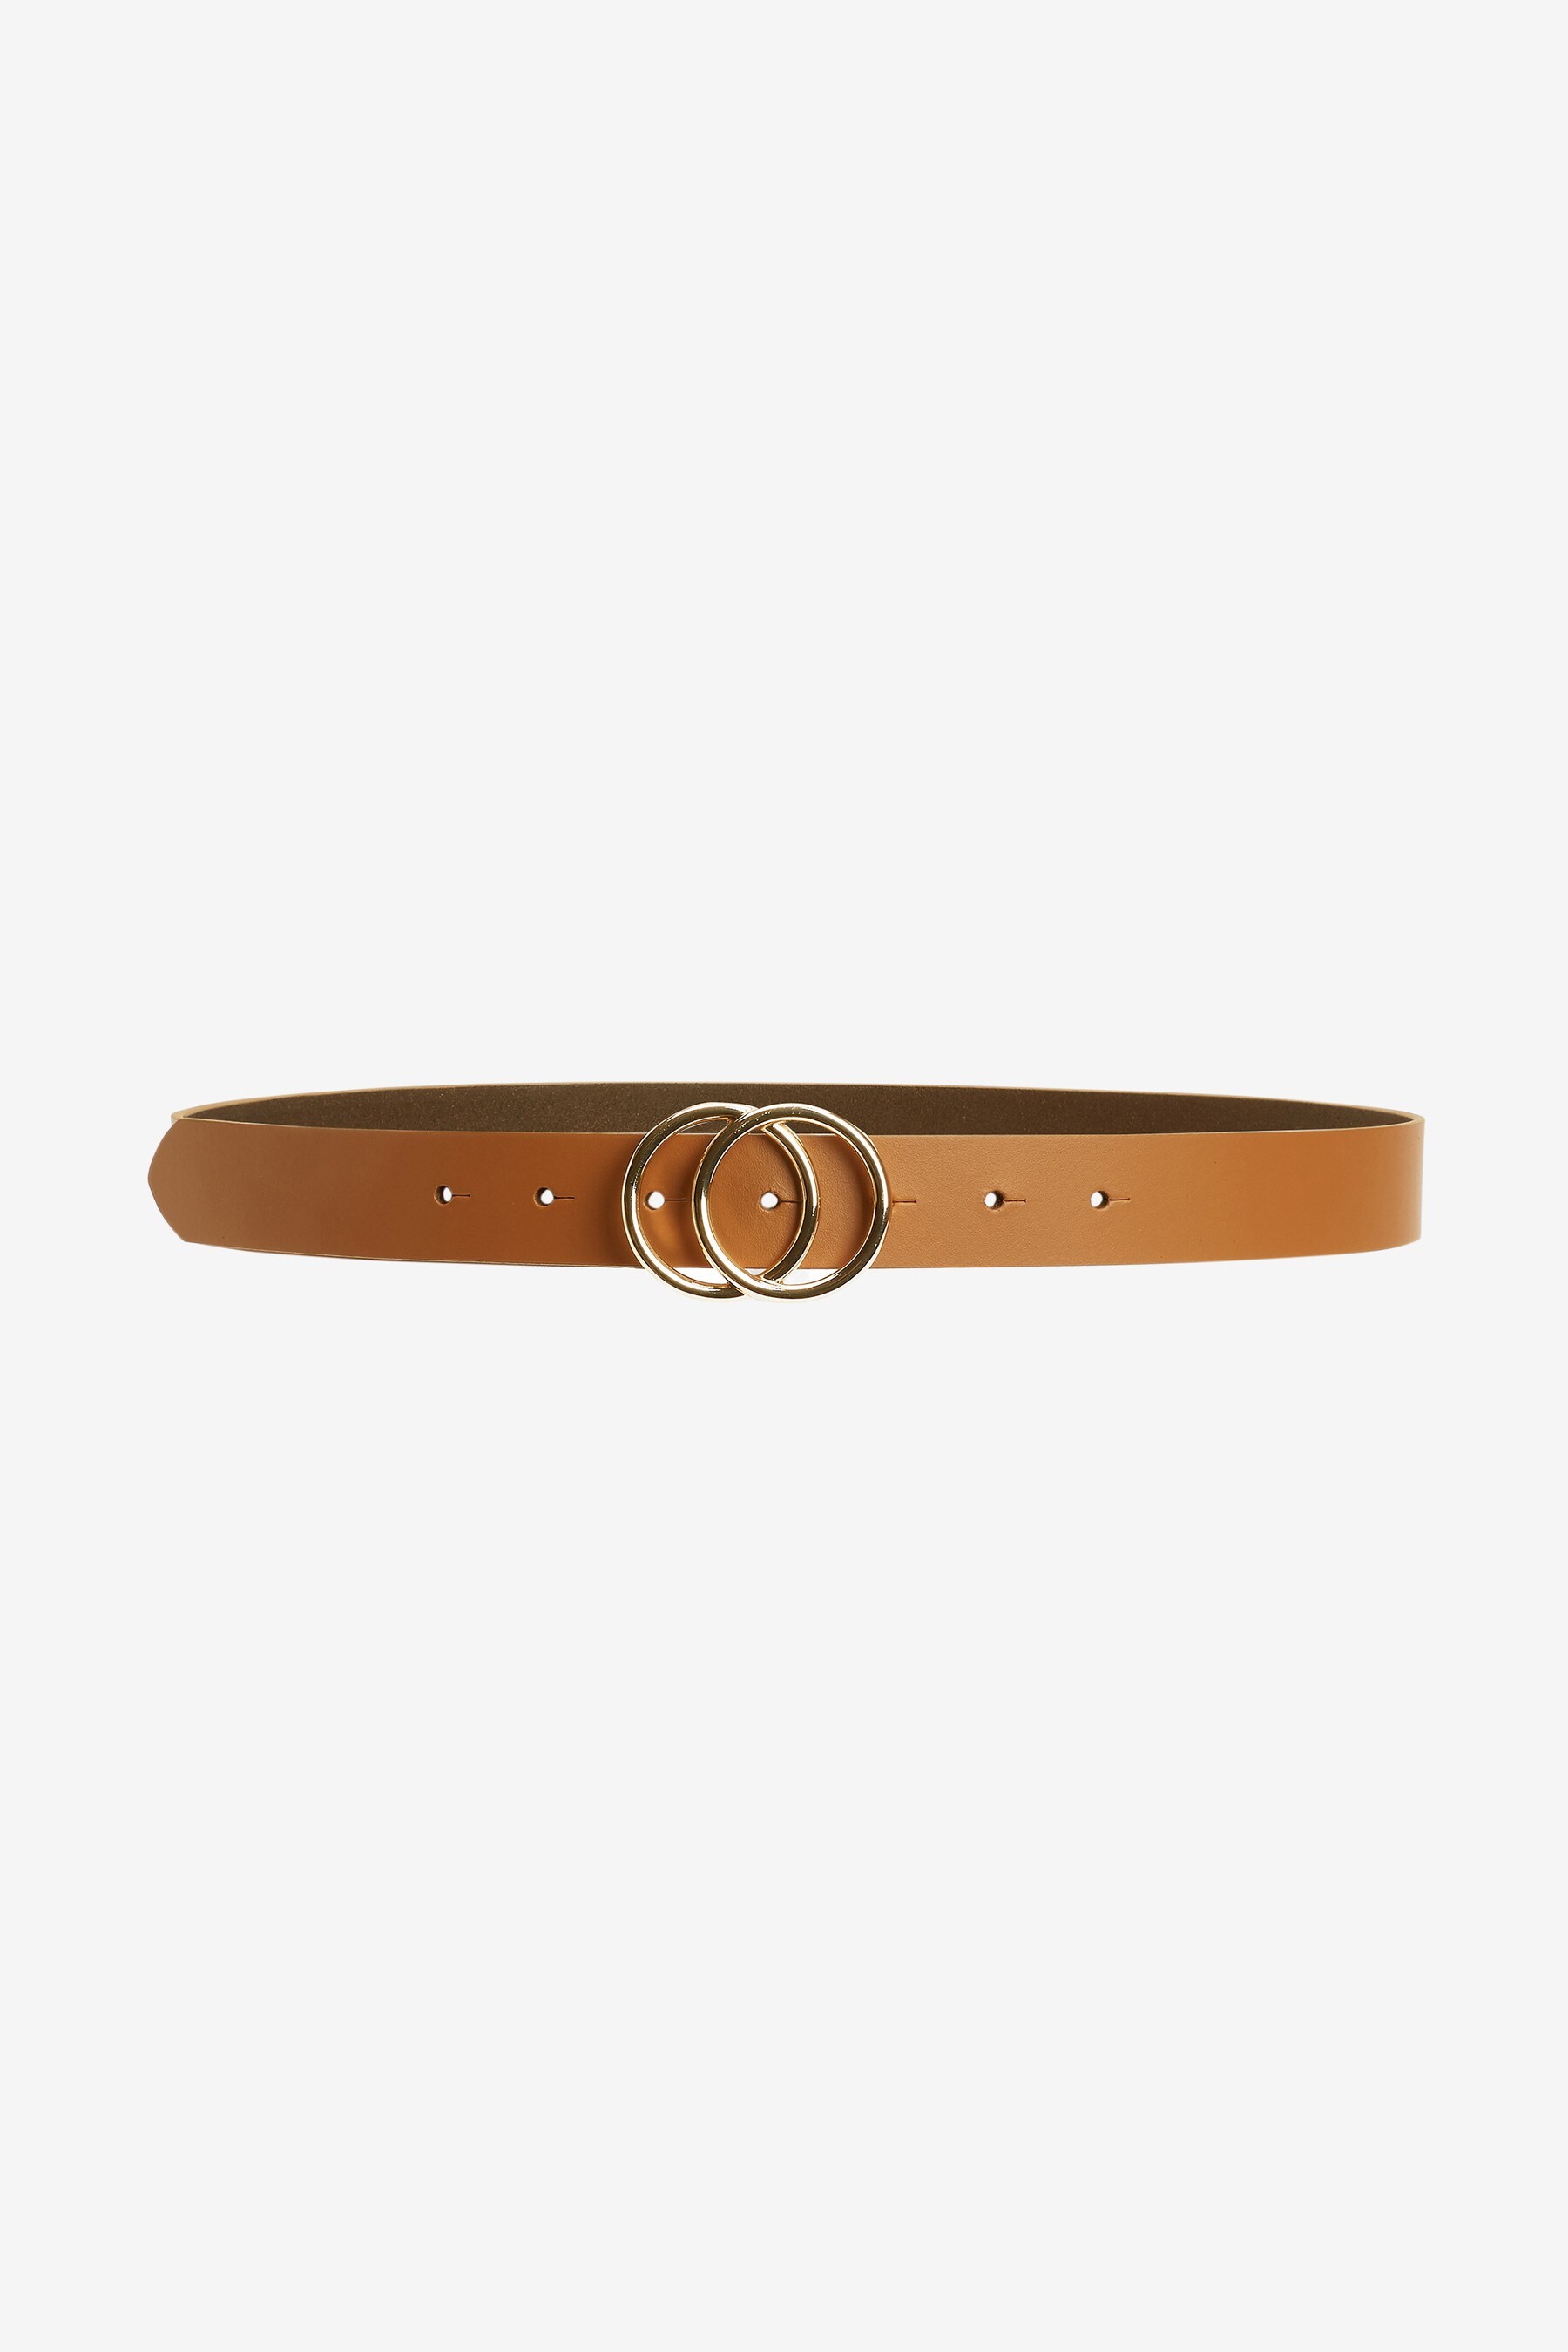 Buy Tan Brown Leather Circle Buckle Jeans Belt from the Next UK online shop